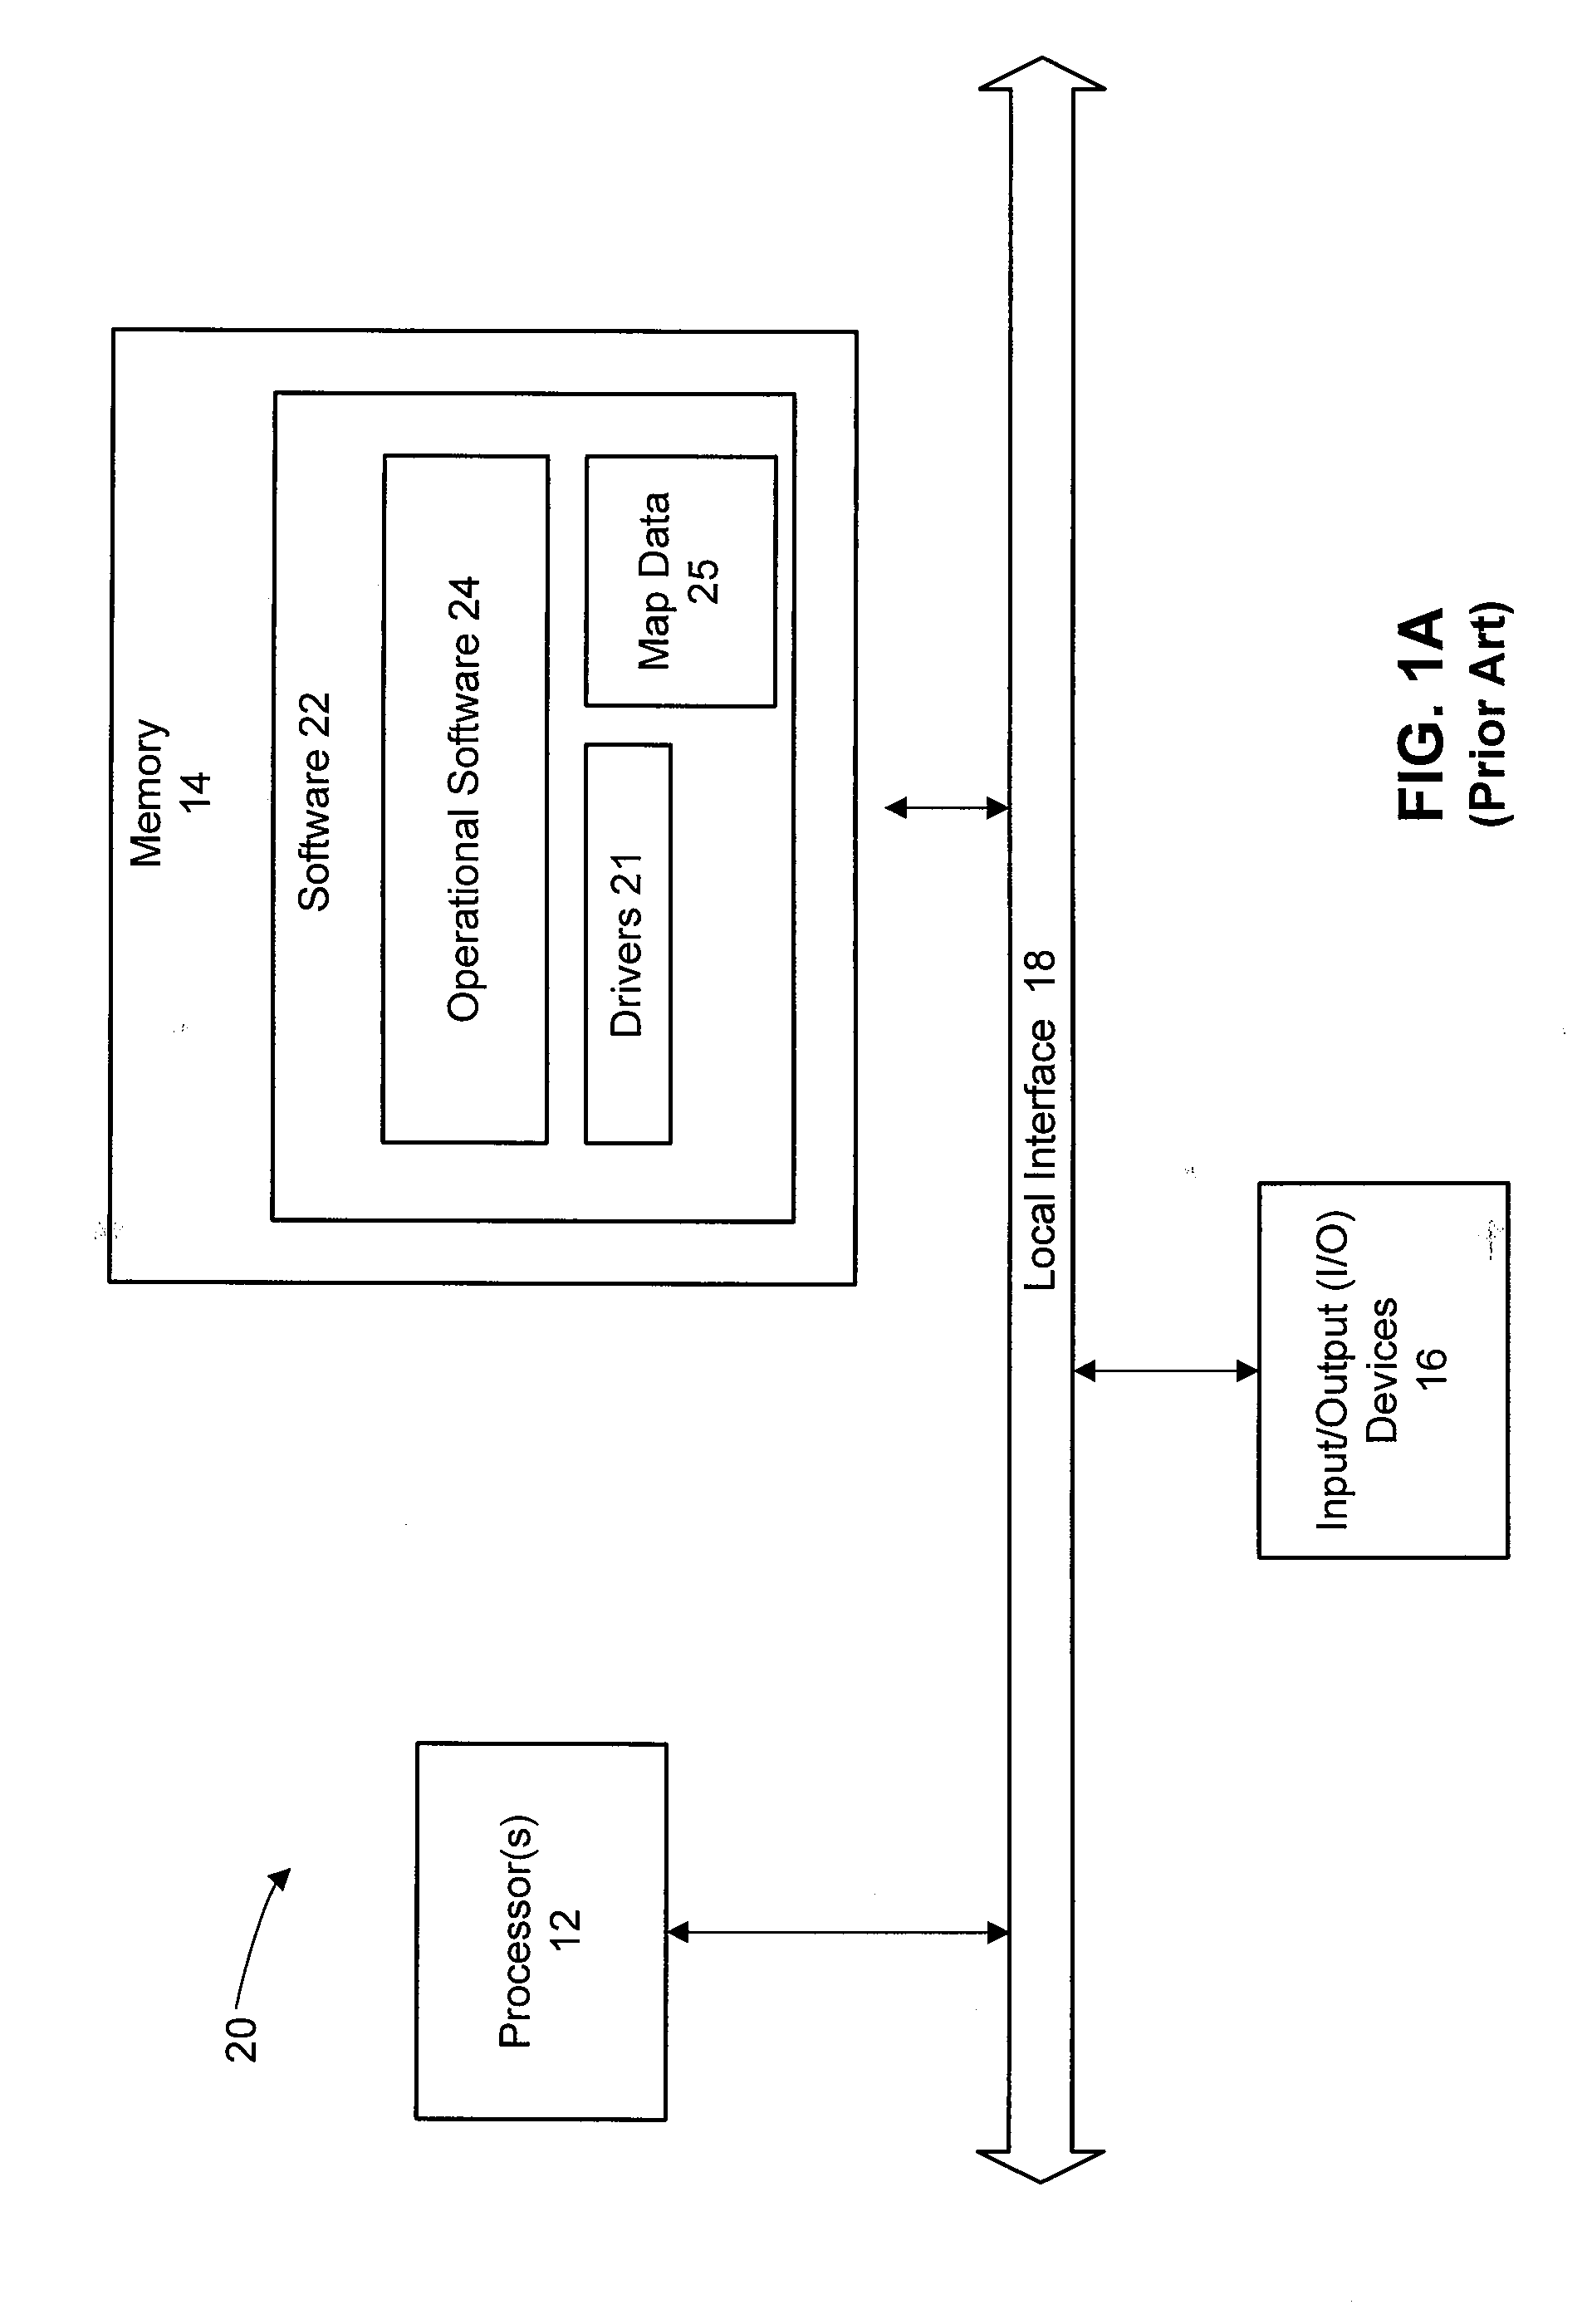 Control Systems and Methods for a Personal Communication Device (PCD)